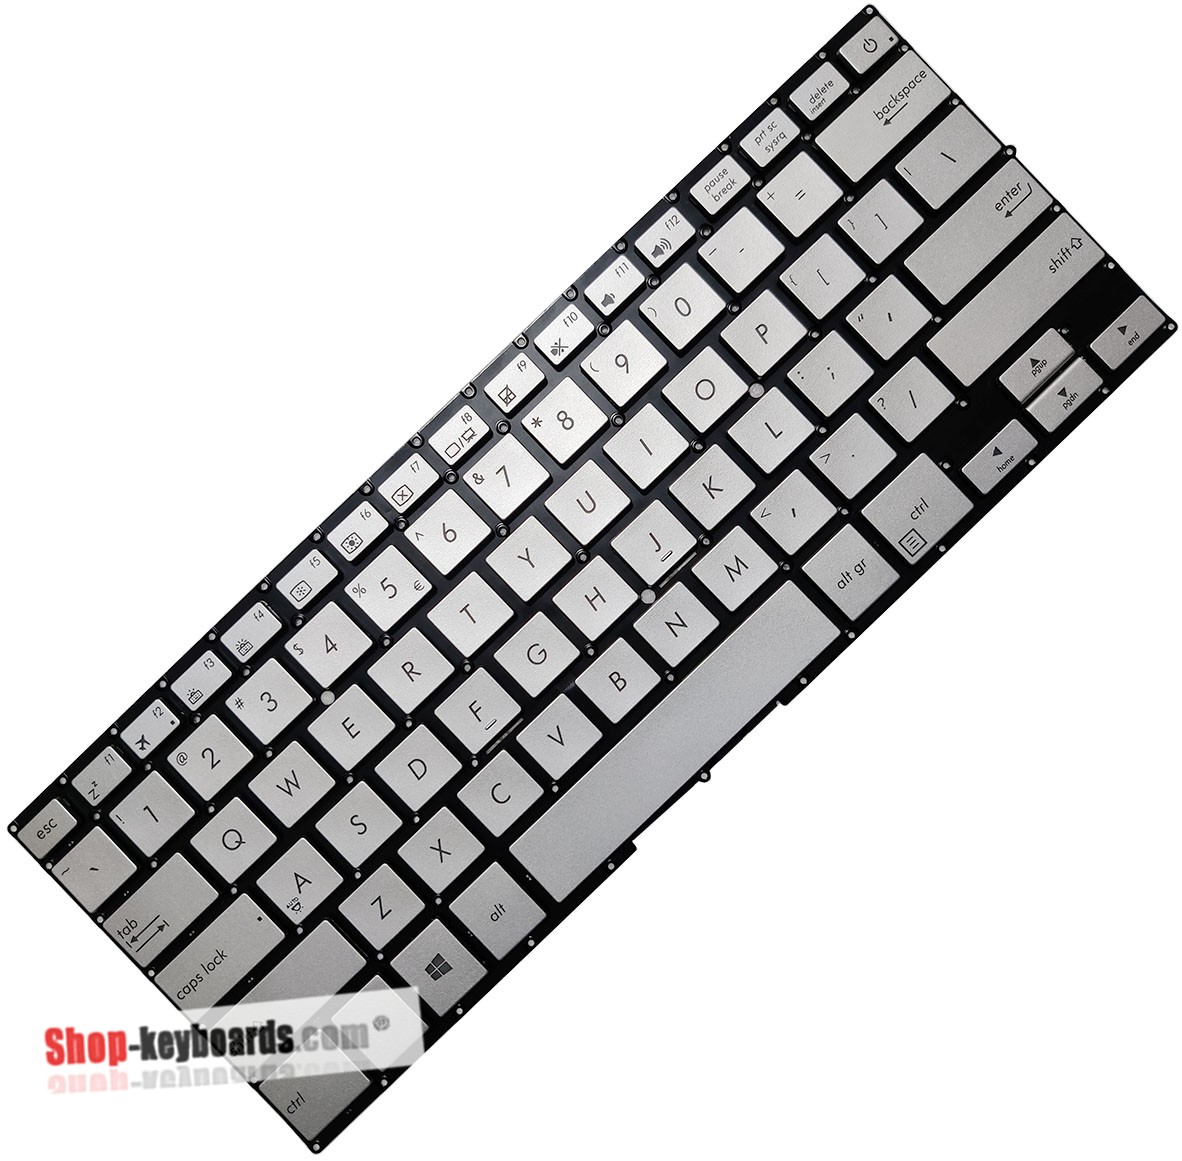 Asus 0KNB0-D620UK00 Keyboard replacement